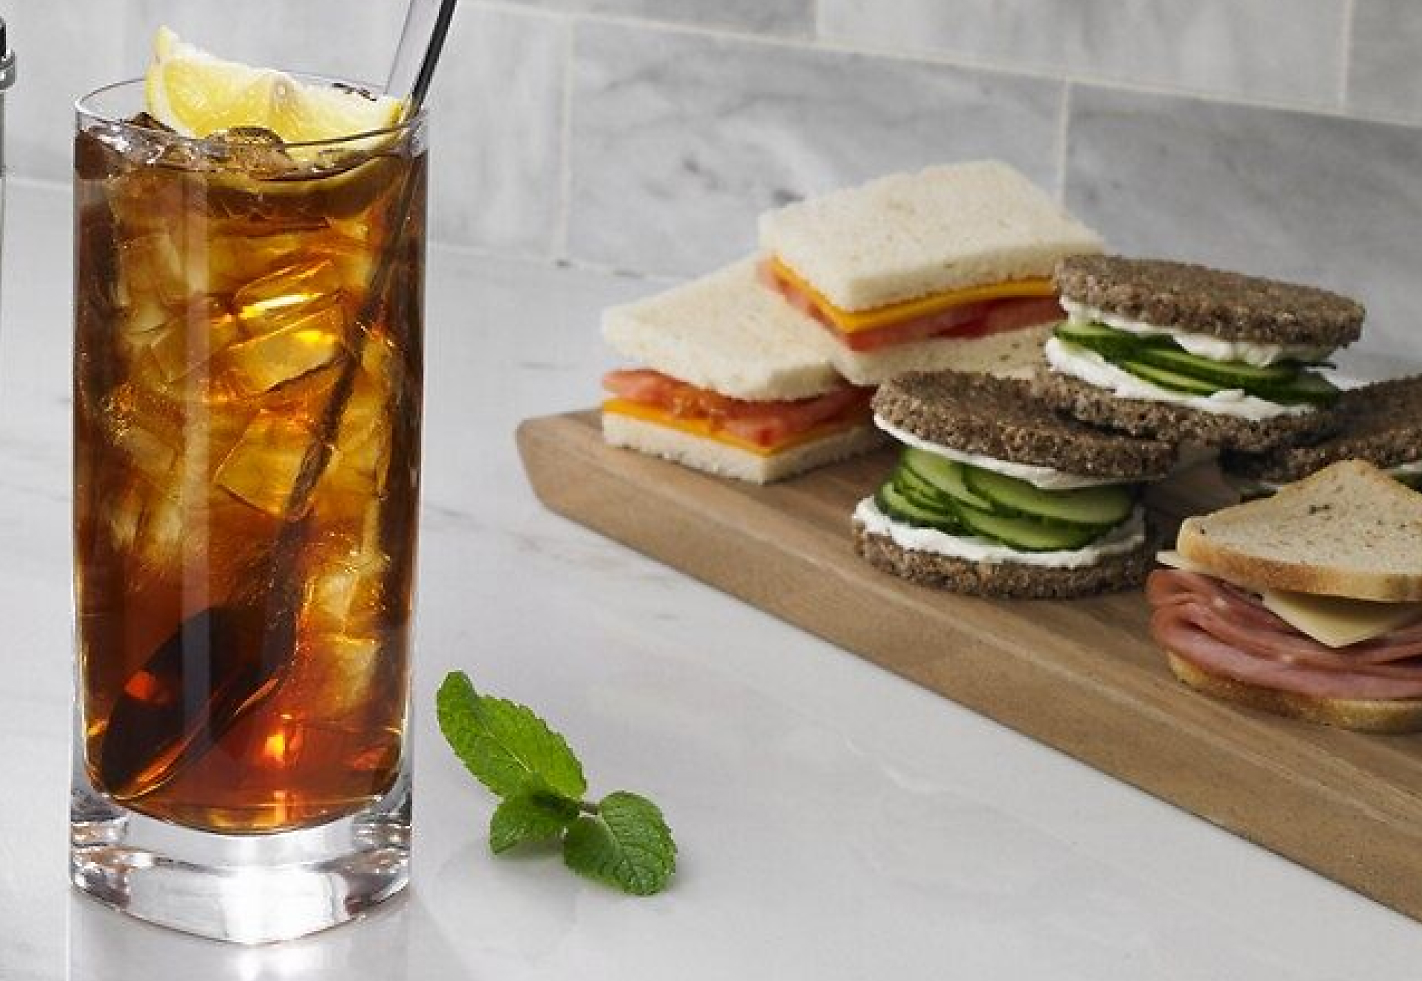 Glass of iced tea next to sandwiches